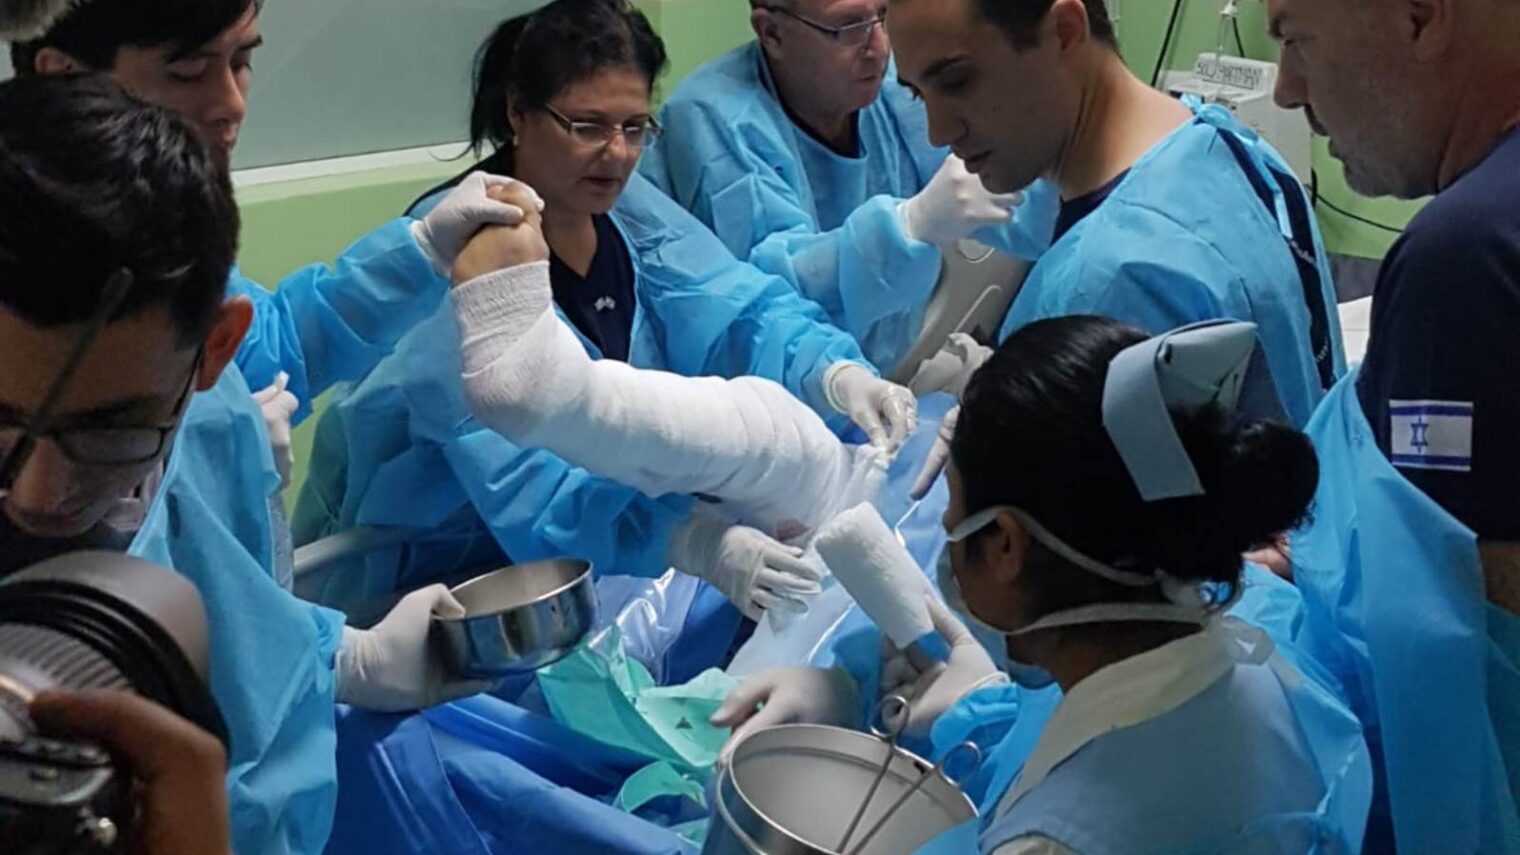 Israeli medical team treating a burn victim in Guatemala Cityâ€™s Roosevelt Hospital following the Fuego volcano eruption. Photo courtesy of the Ministry of Foreign Affairs